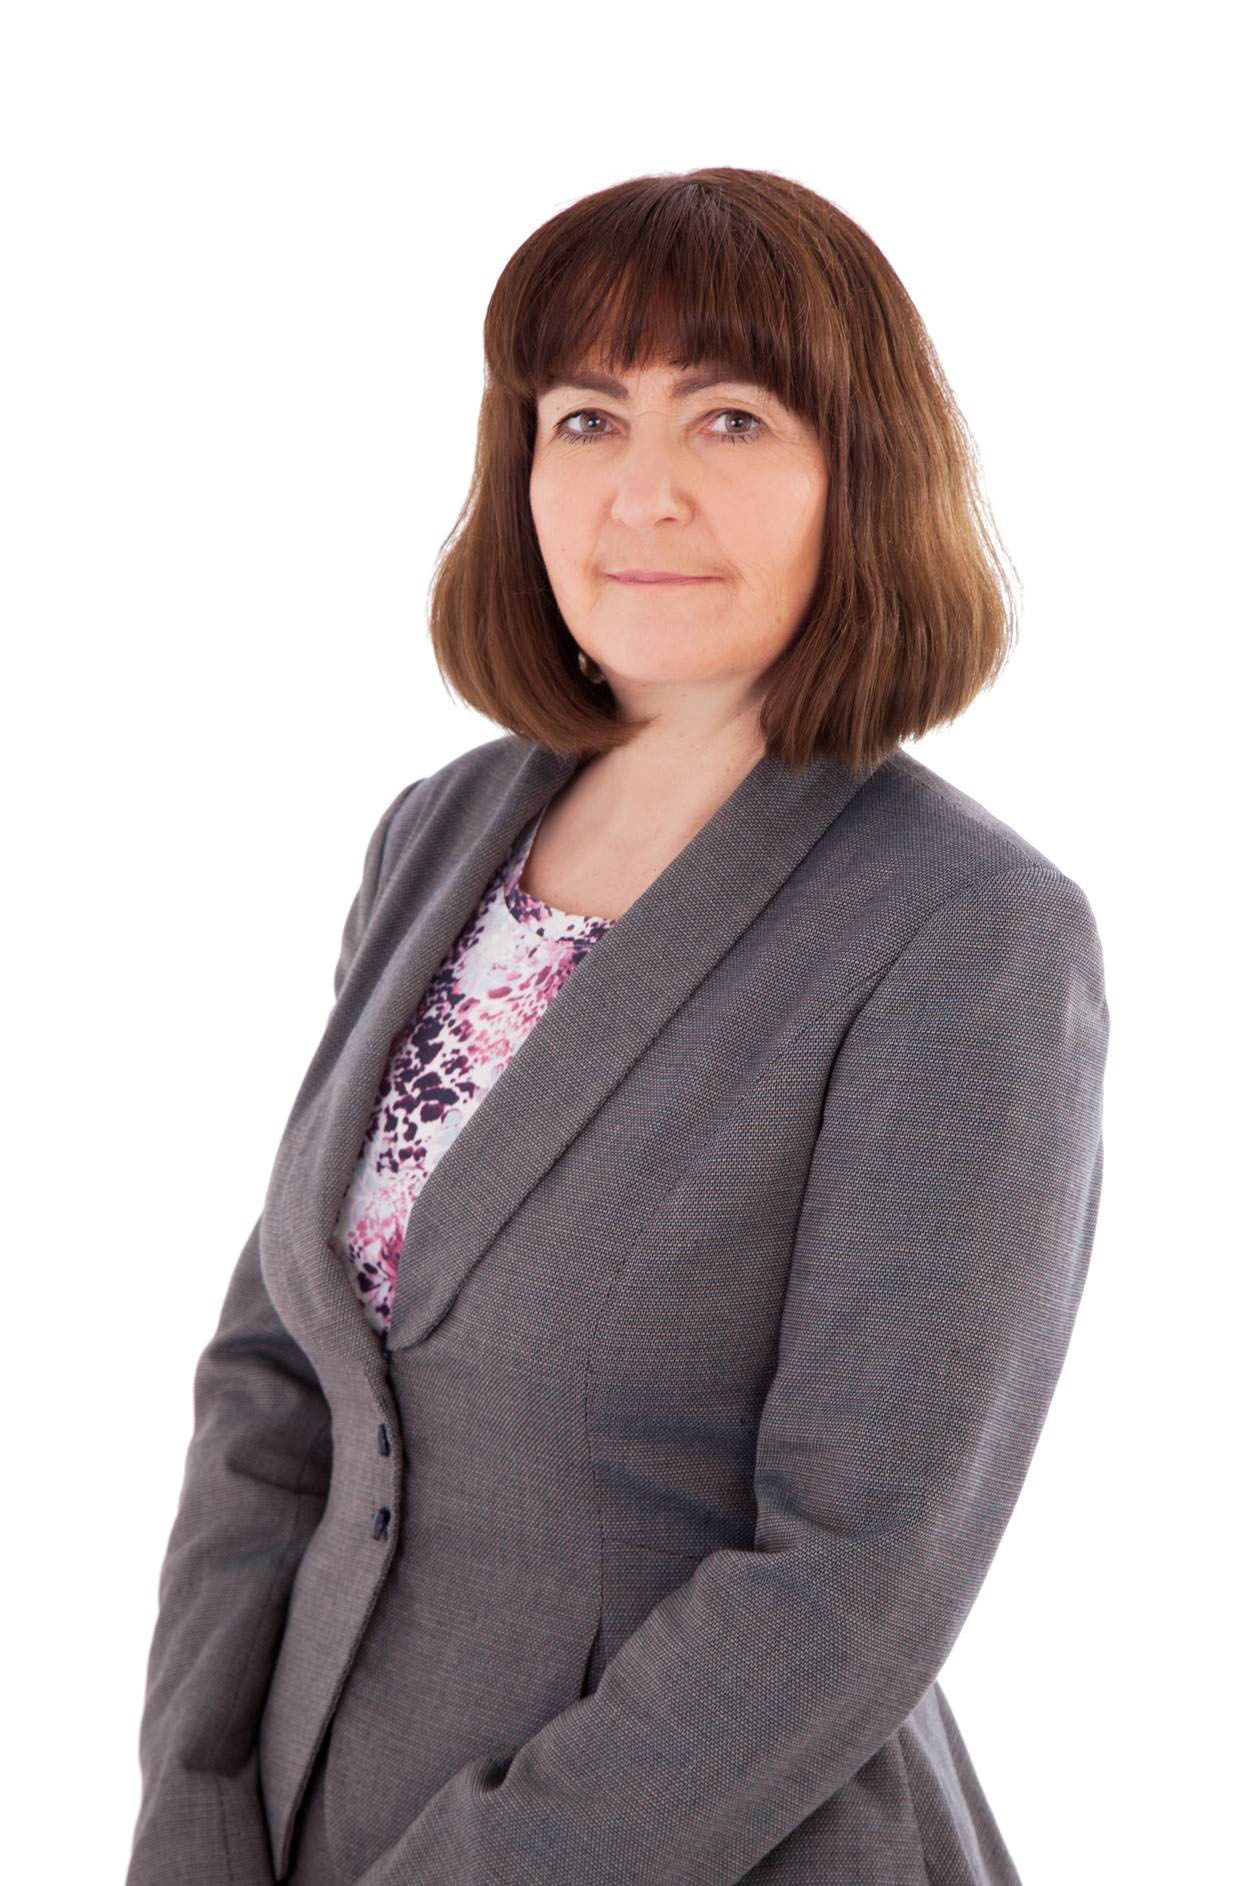 Lesley Rudd, chief executive of Electrical Safety First